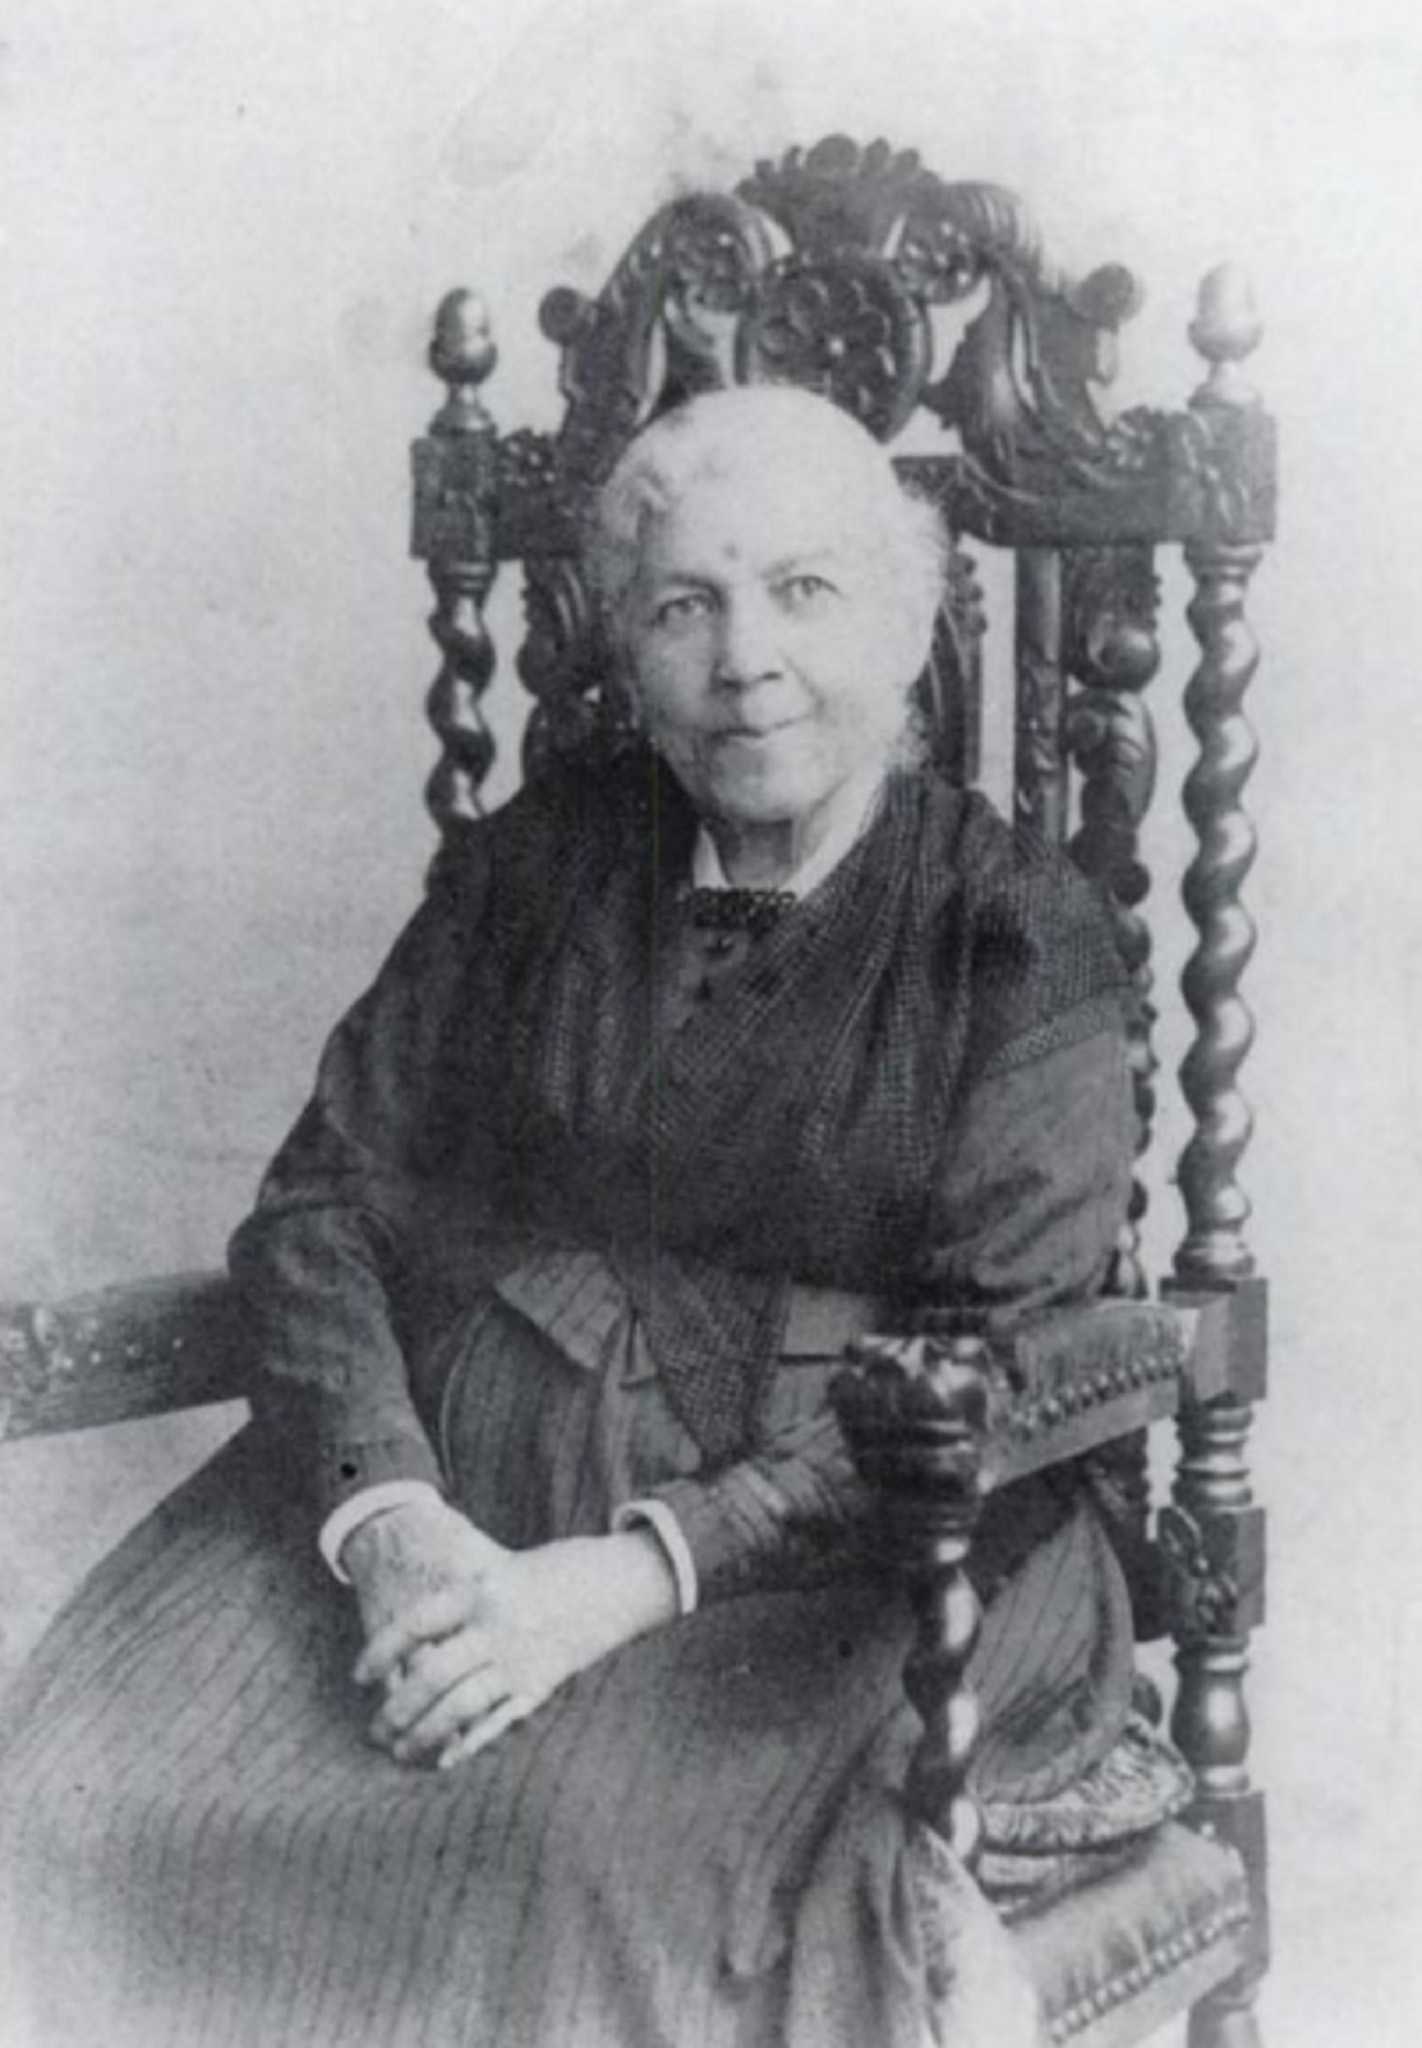 Photograph of Harriet Jacobs sitting in a large wooden chair